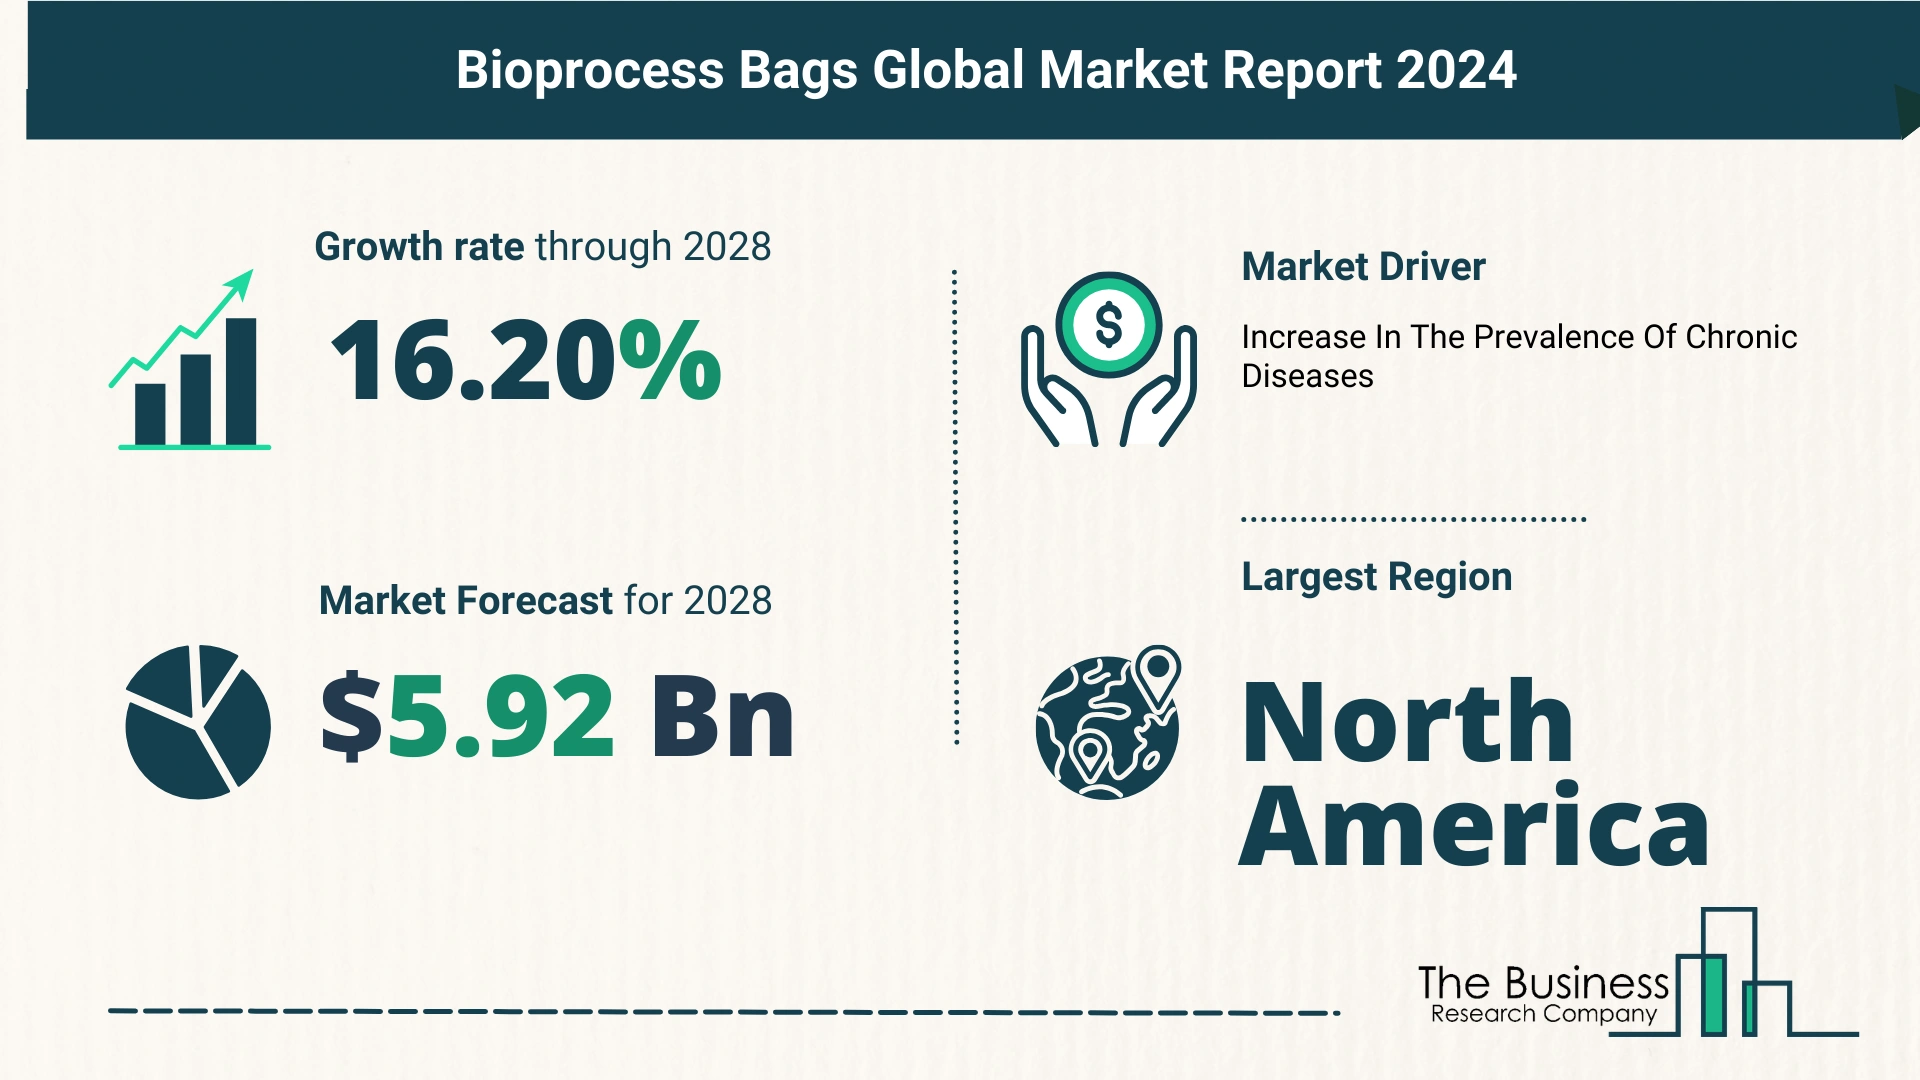 Bioprocess Bags Market Forecast 2024: Forecast Market Size, Drivers And Key Segments